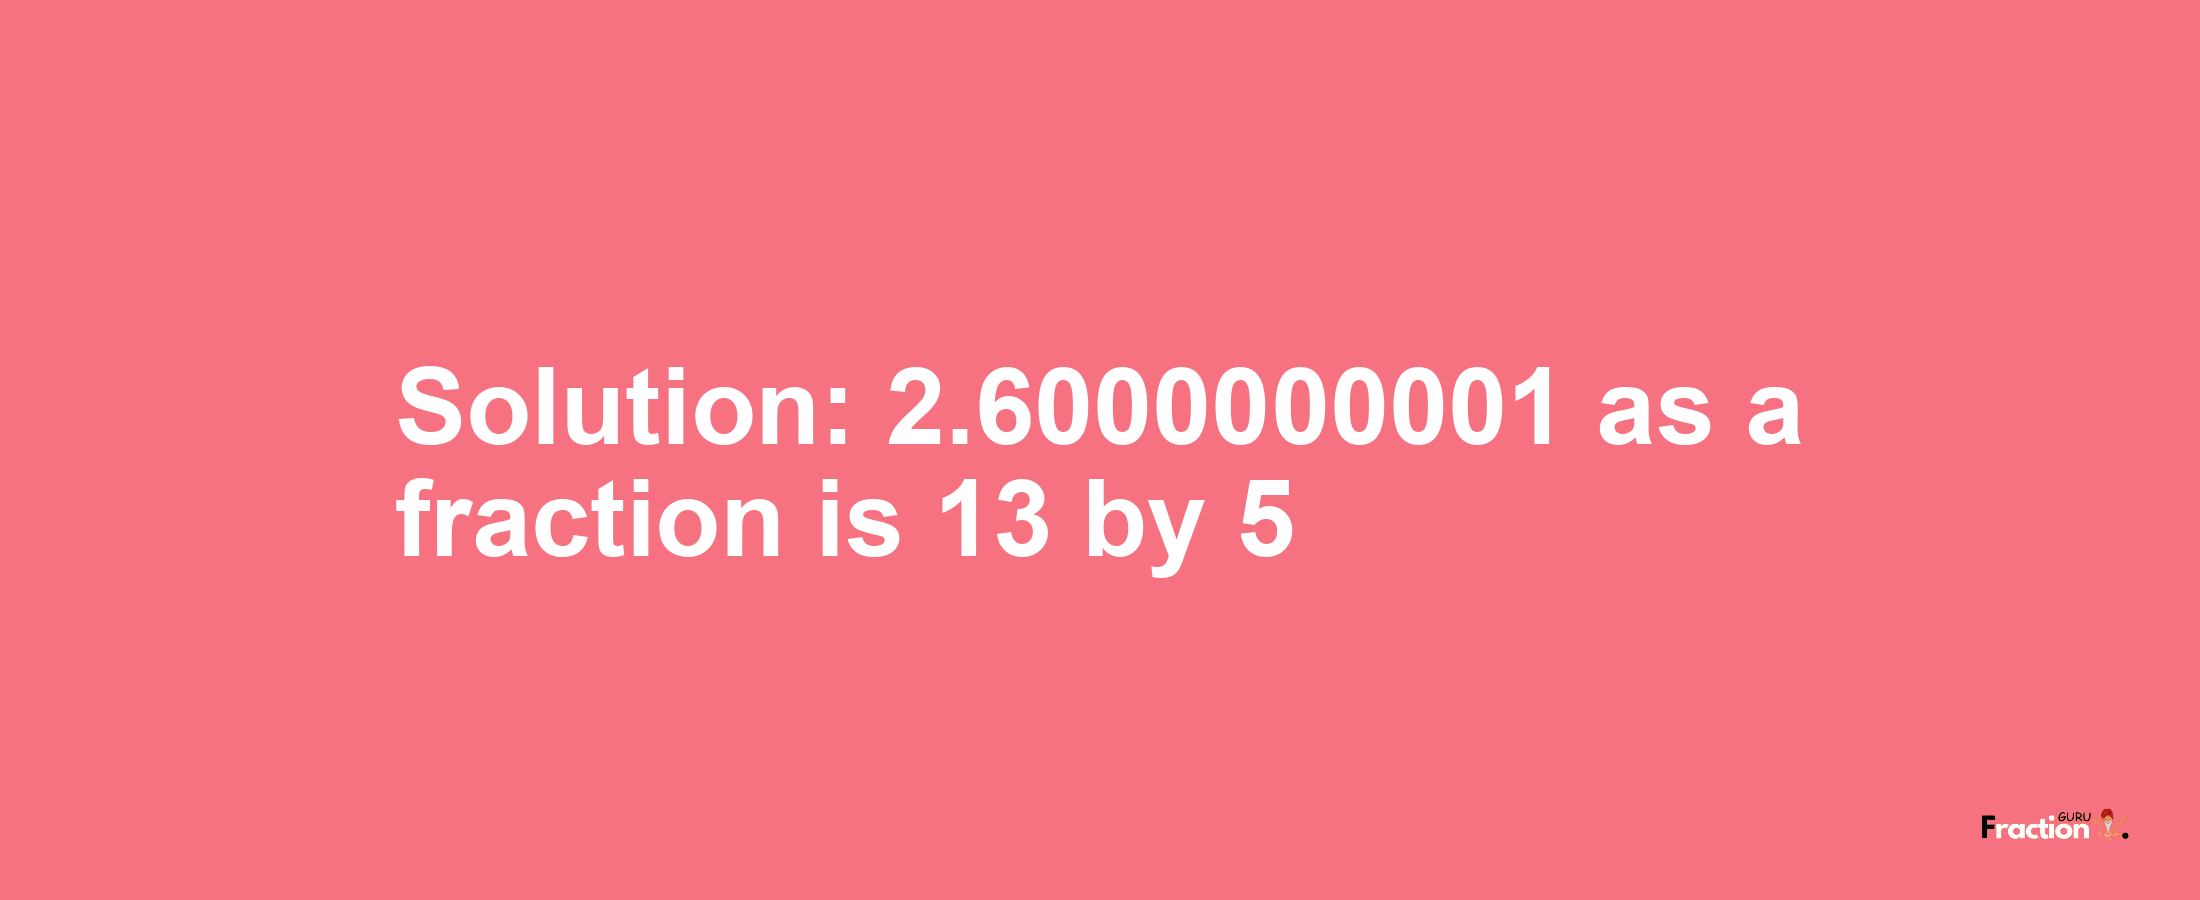 Solution:2.6000000001 as a fraction is 13/5